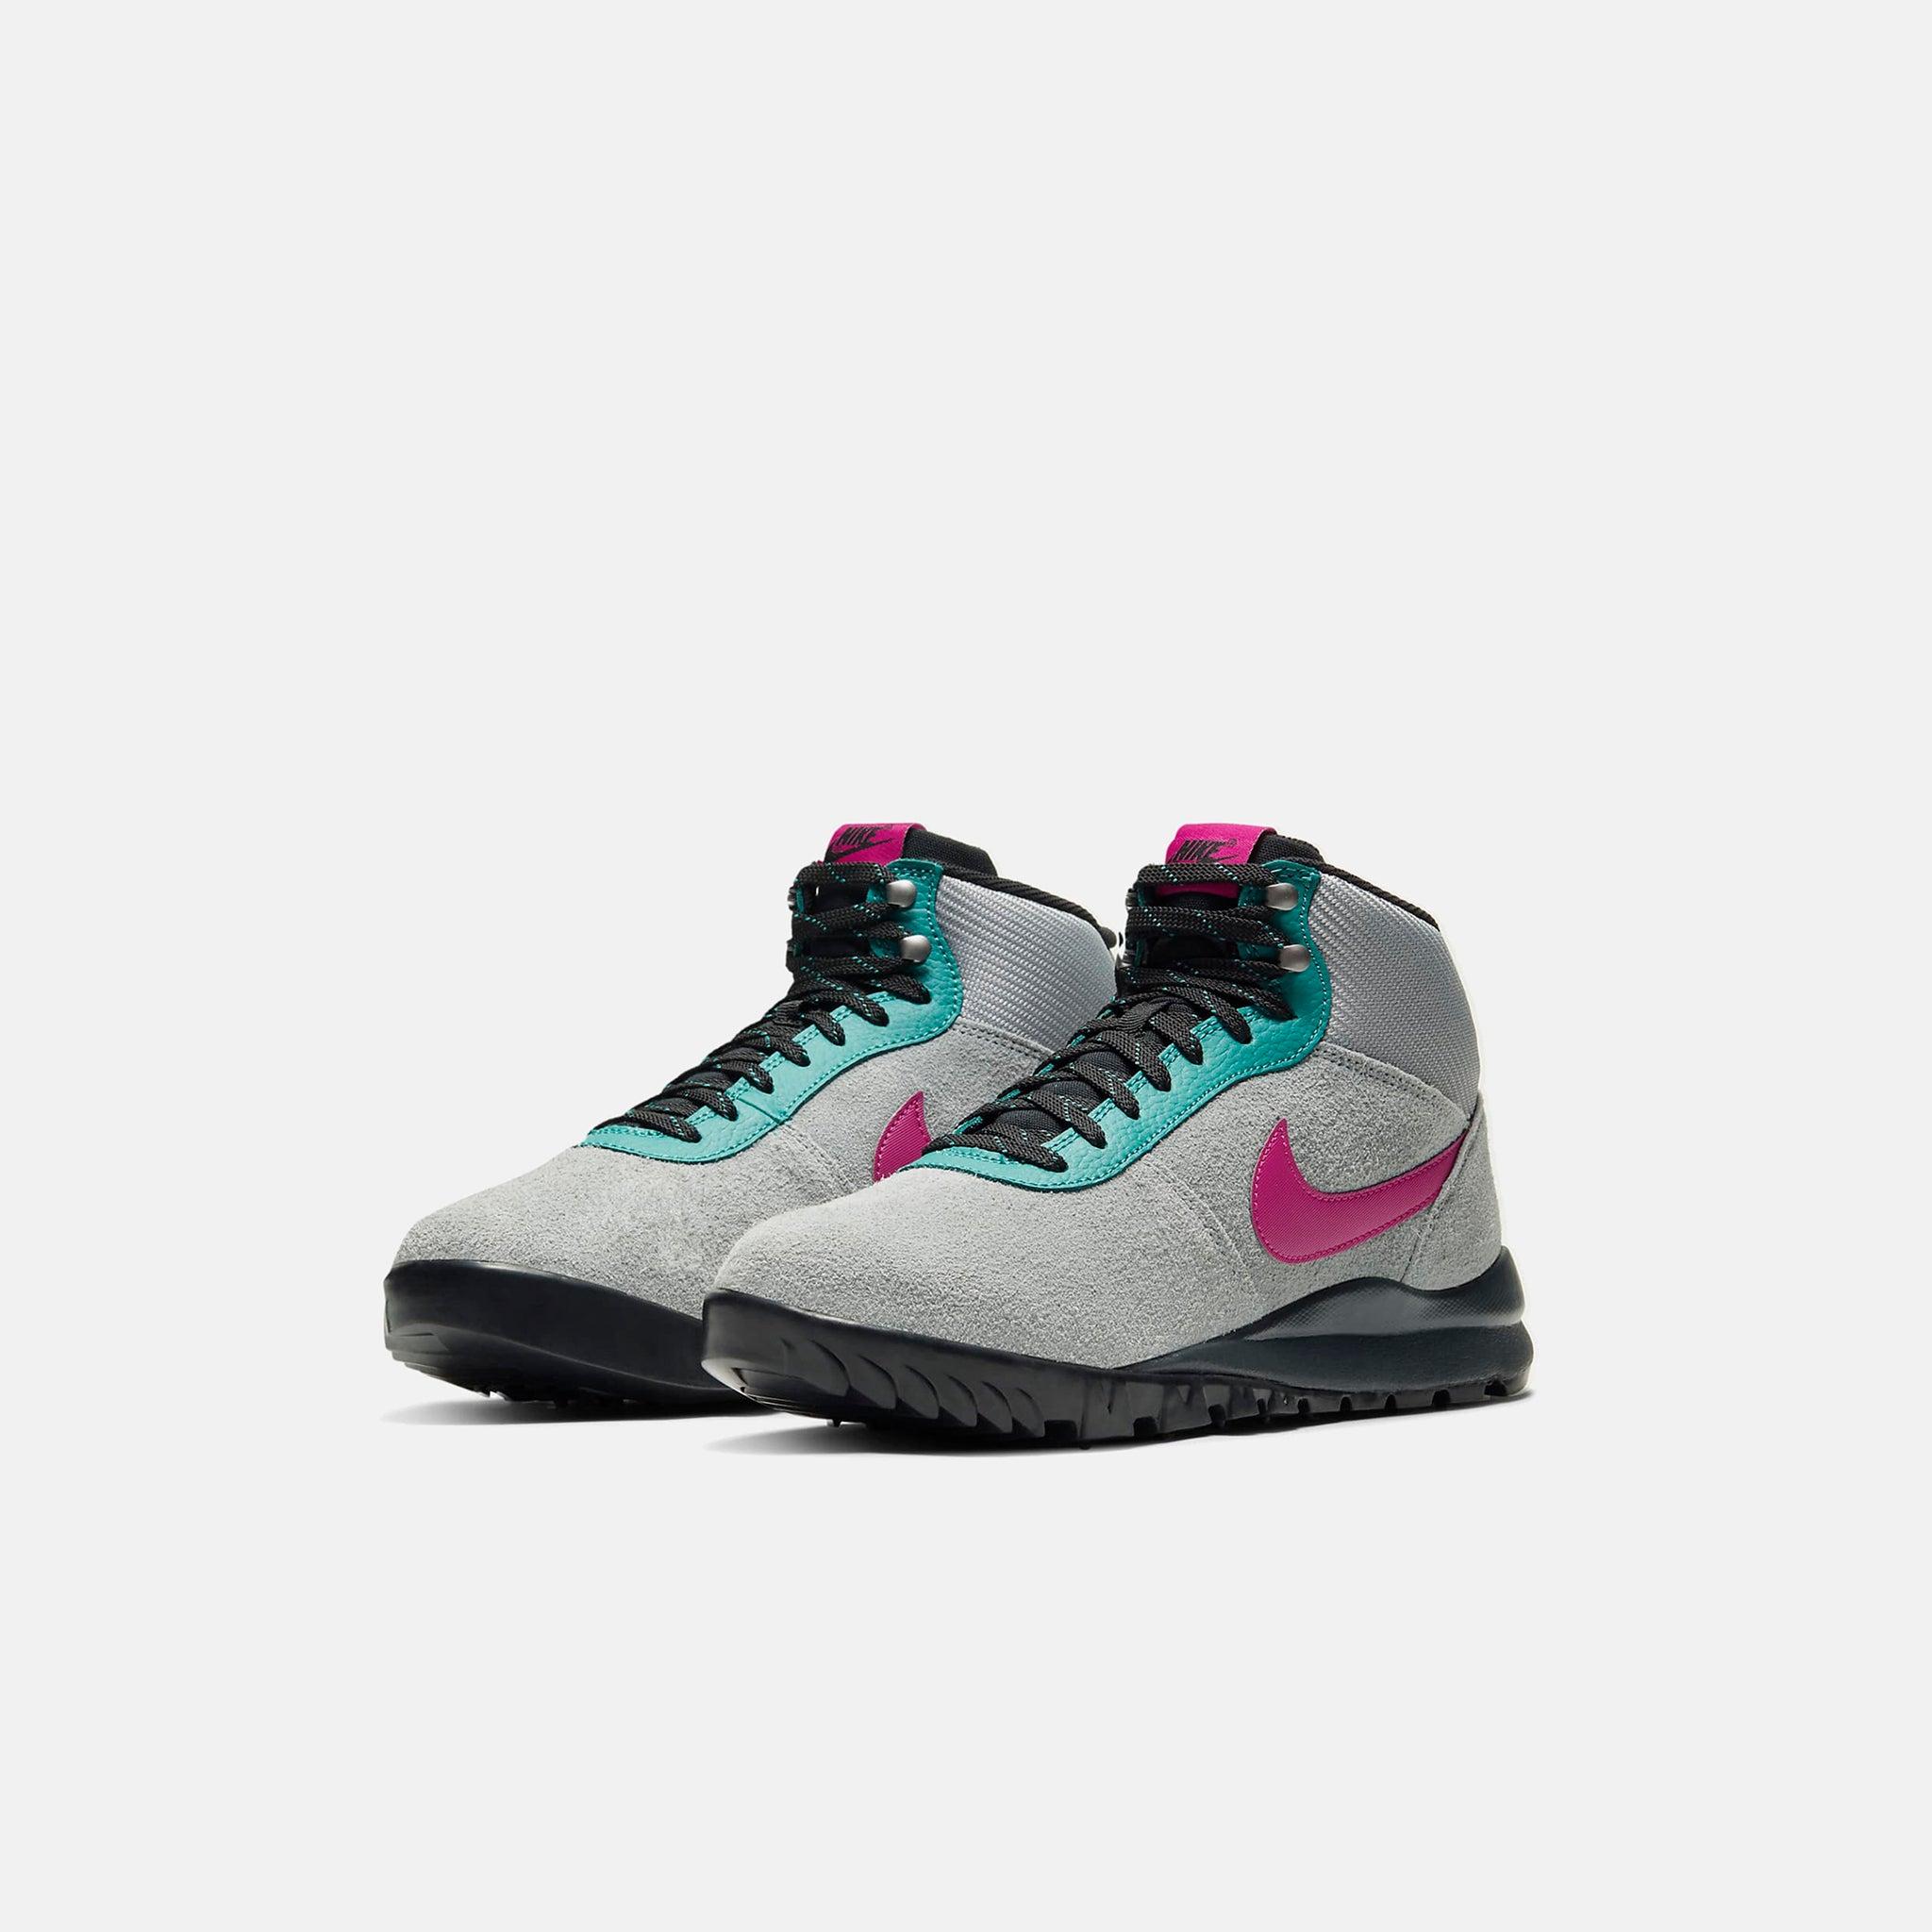 Nike Suede Hoodland in Particle Grey/Magenta (Gray) for Men - Lyst